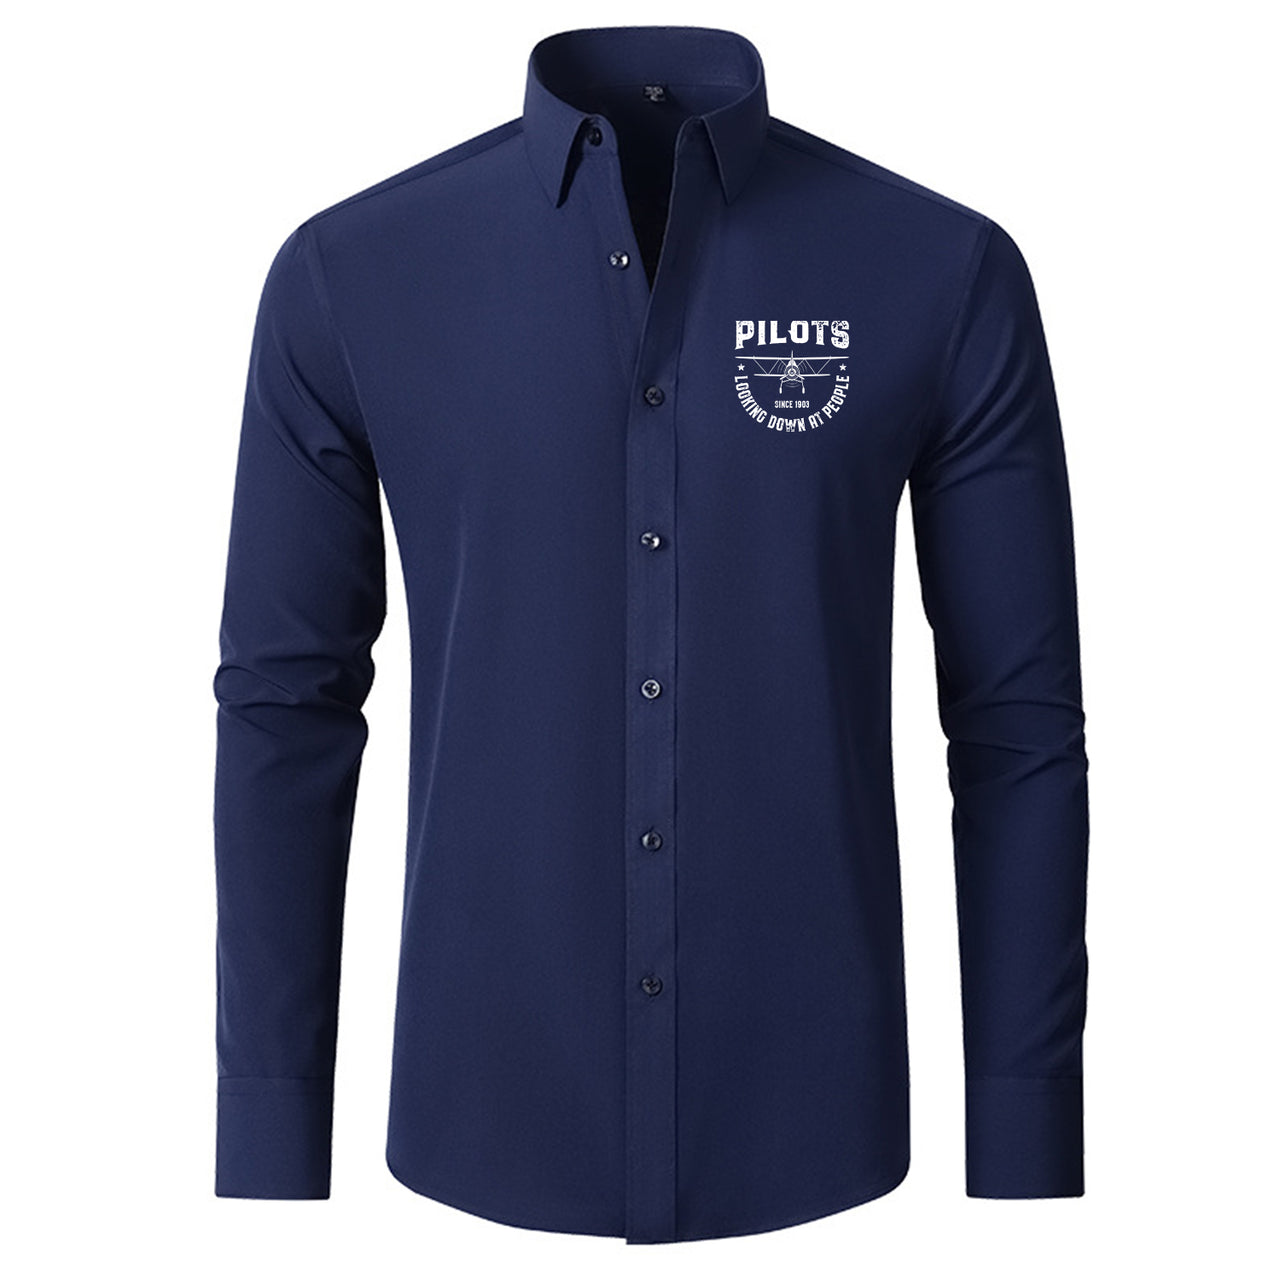 Pilots Looking Down at People Since 1903 Designed Long Sleeve Shirts